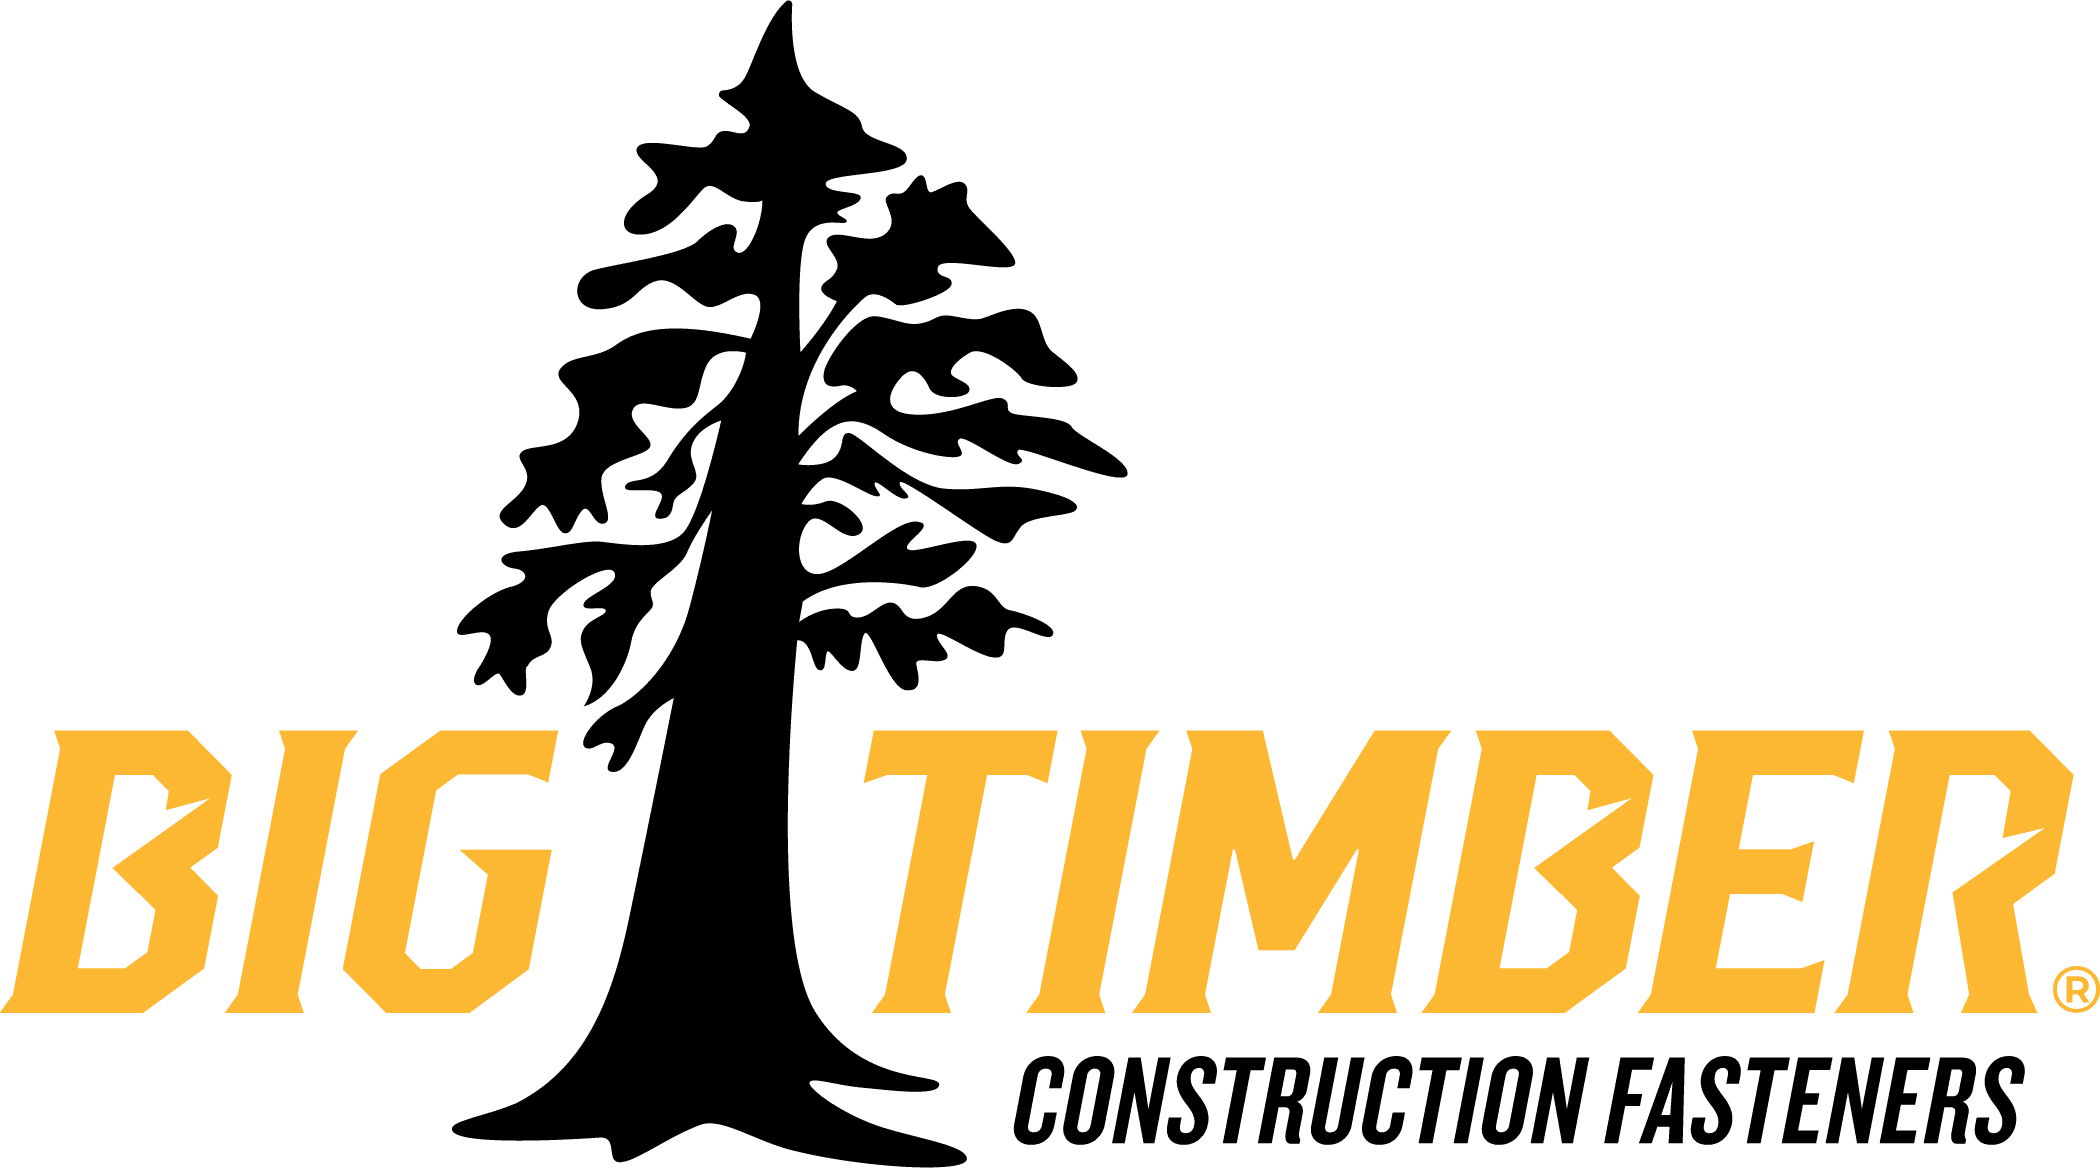 Big Timber Construction Fasteners